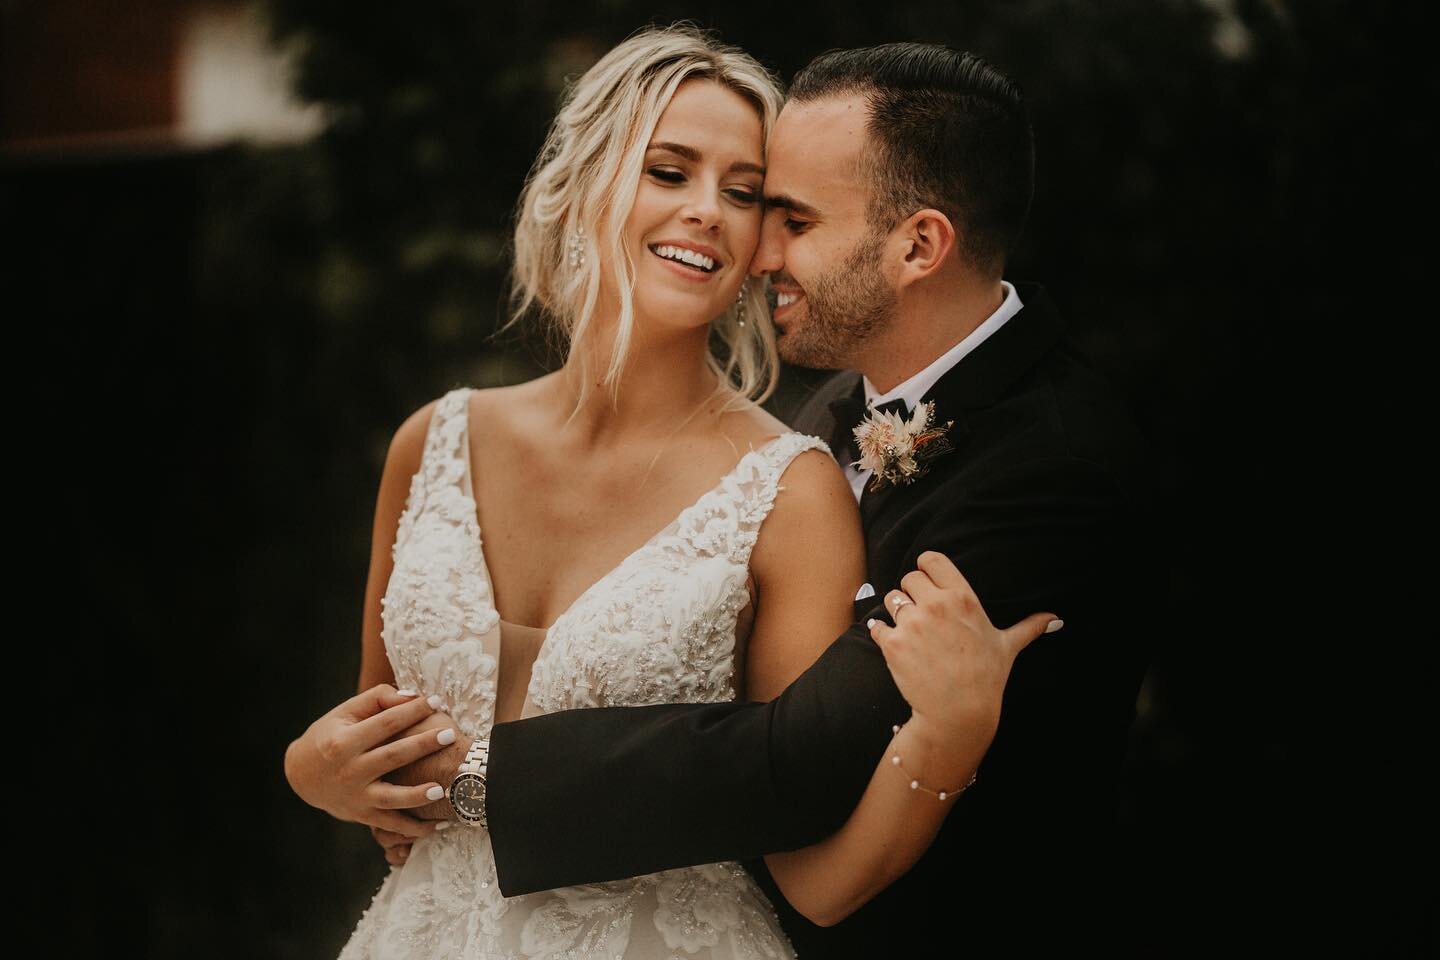 I married up 😍#livinlavidavazquez
&bull;
&bull;
Grateful to @meredithhillerphoto for capturing our special day so beautifully and sending us a sneak peek. Can&rsquo;t wait to see the rest 🙌🏽